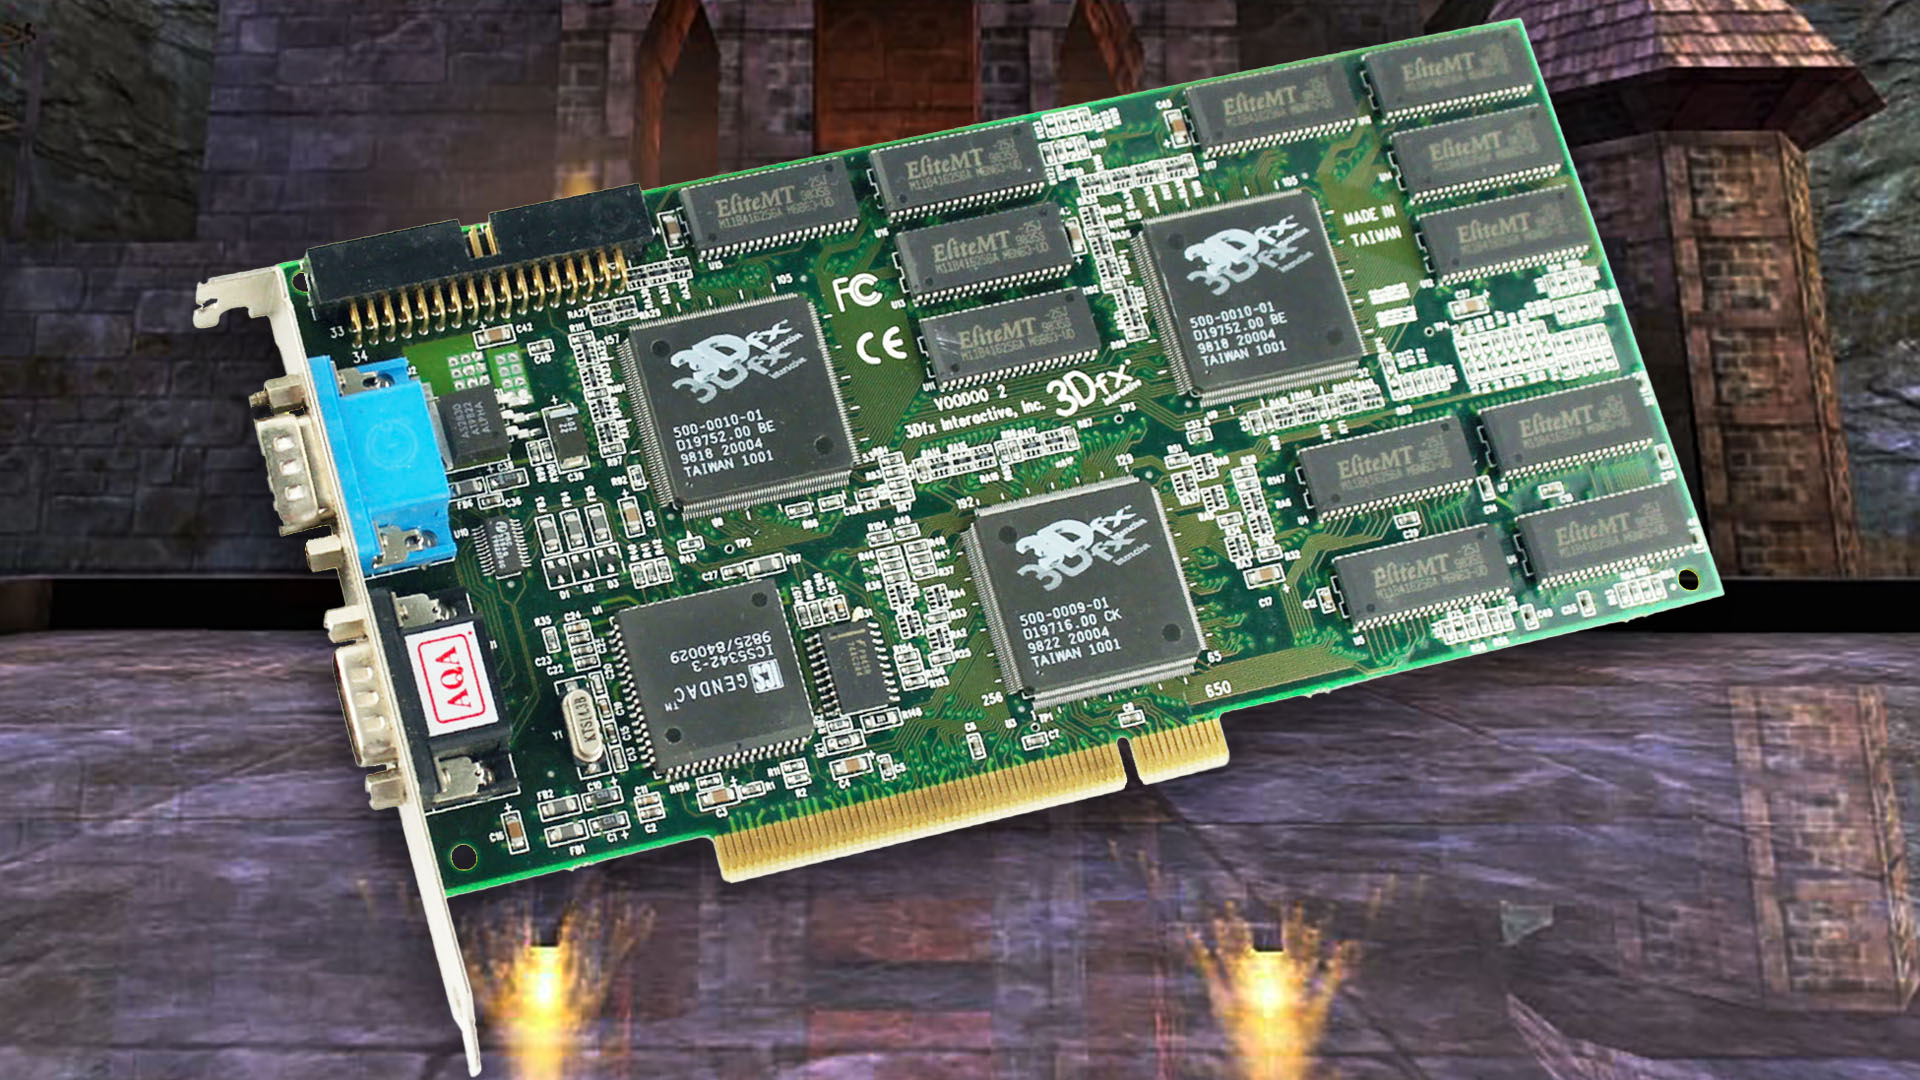 A look back at the 3dfx Voodoo 2 – the last dedicated 3D graphics card